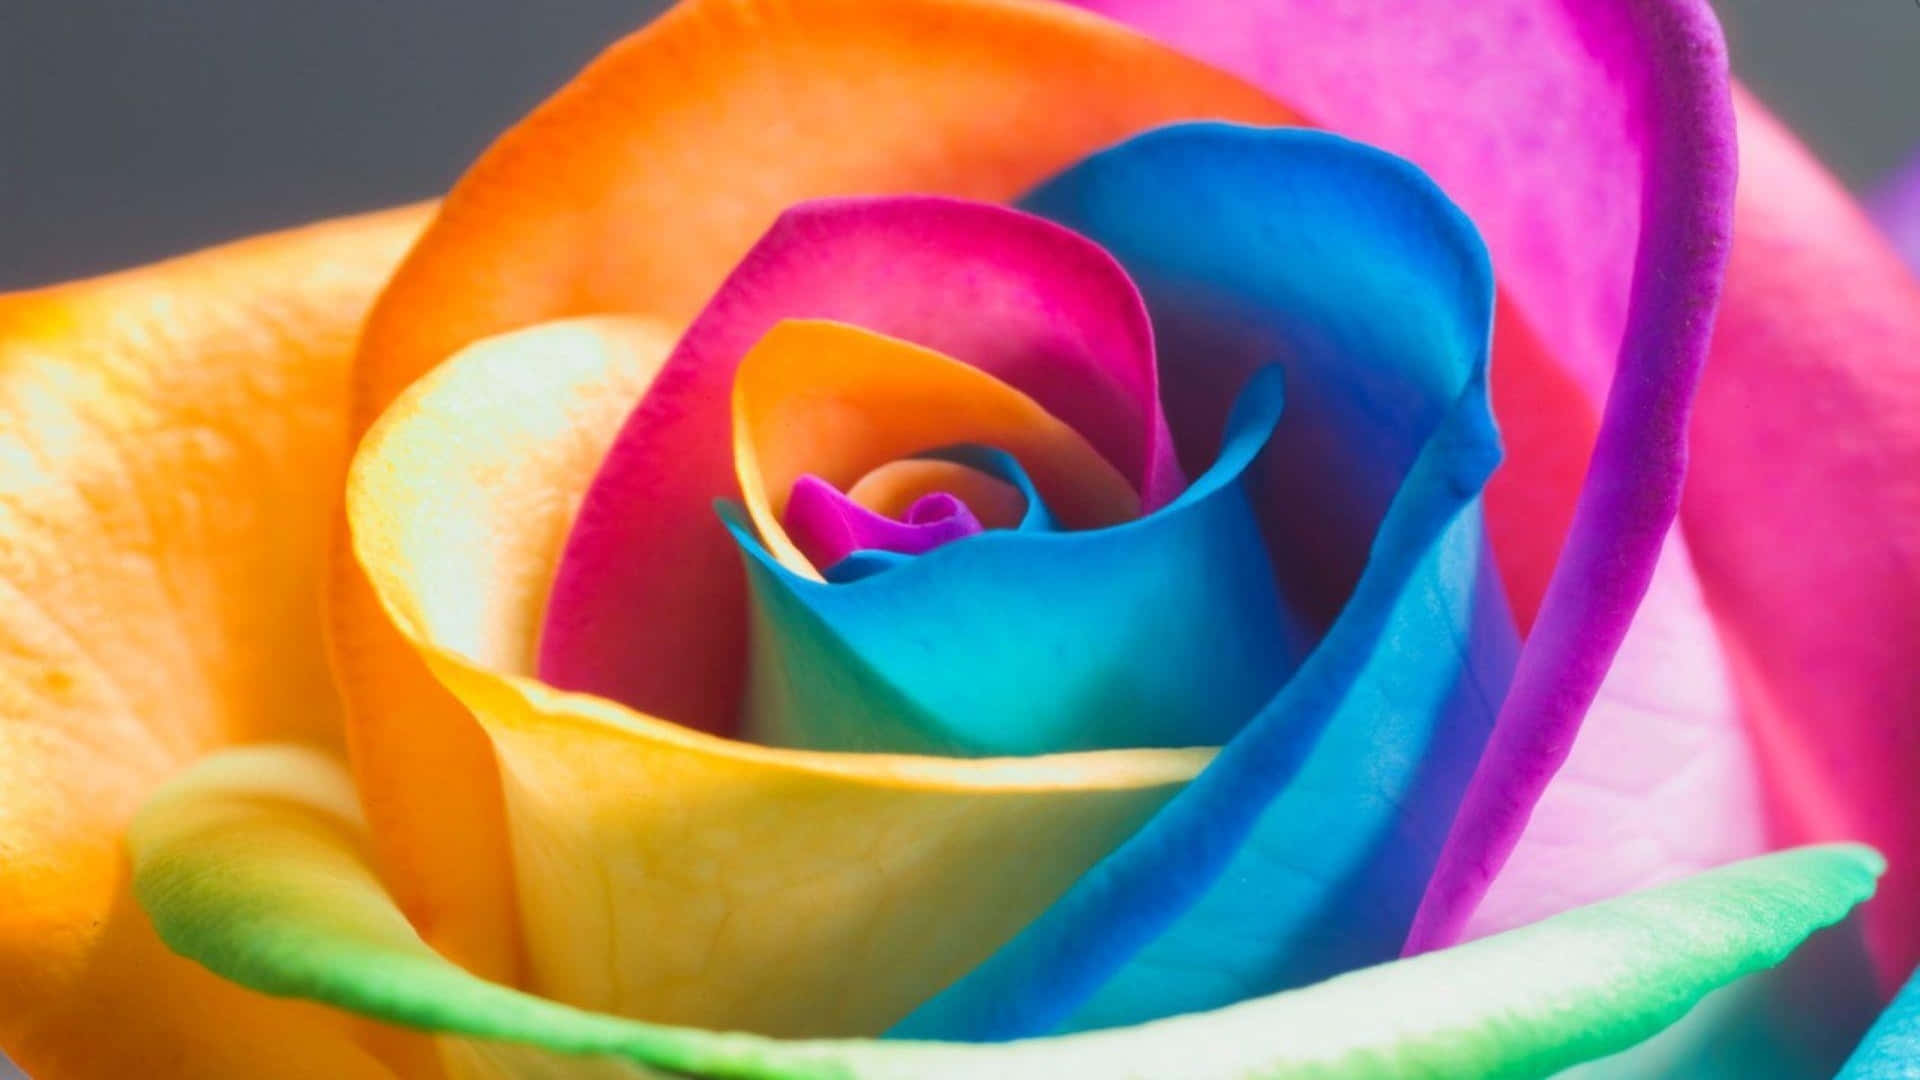 A Close Up Of A Colorful Rose